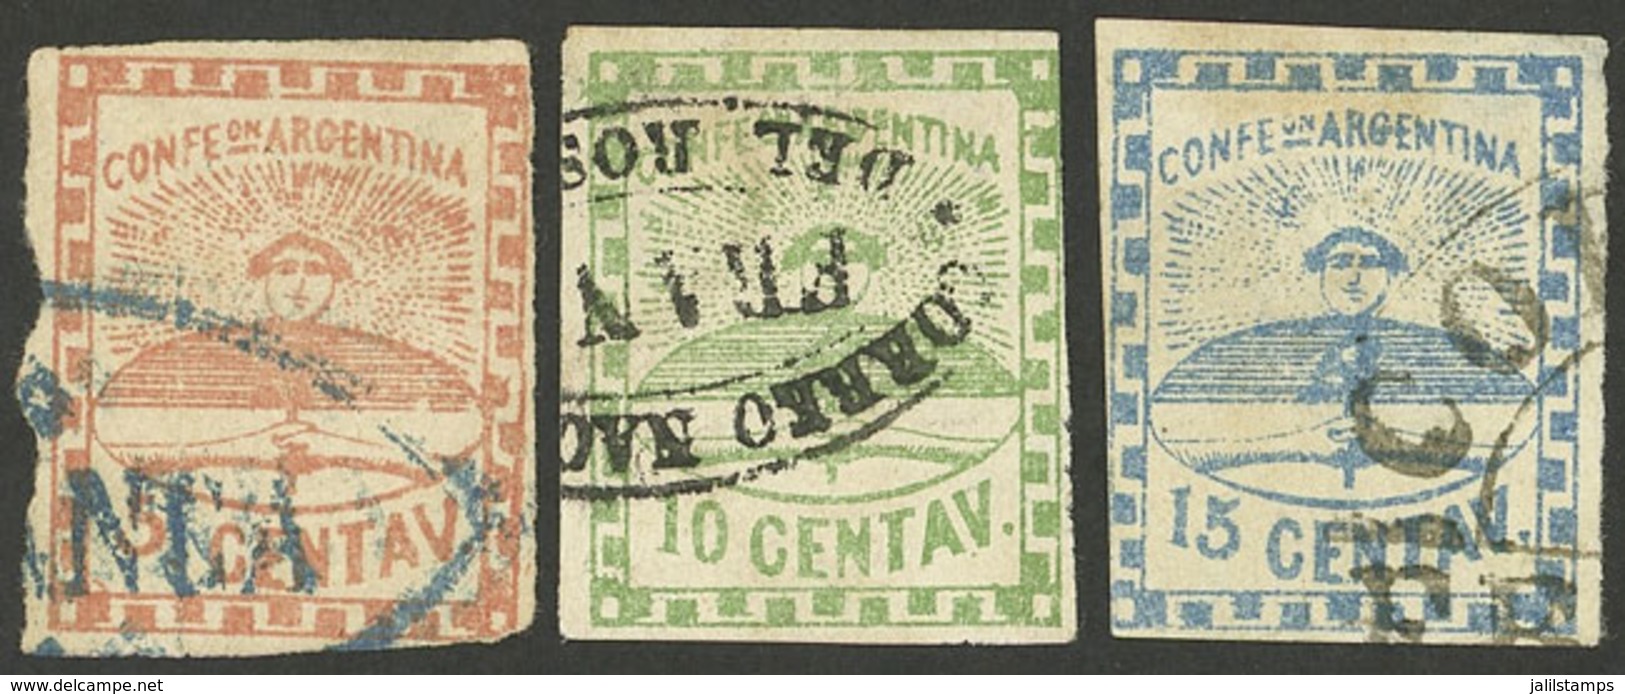 ARGENTINA: GJ.1/3, Small Figures, Complete Set Of 3 Used Values, Minor Faults, Fine Appearance, Low Start! - Unused Stamps